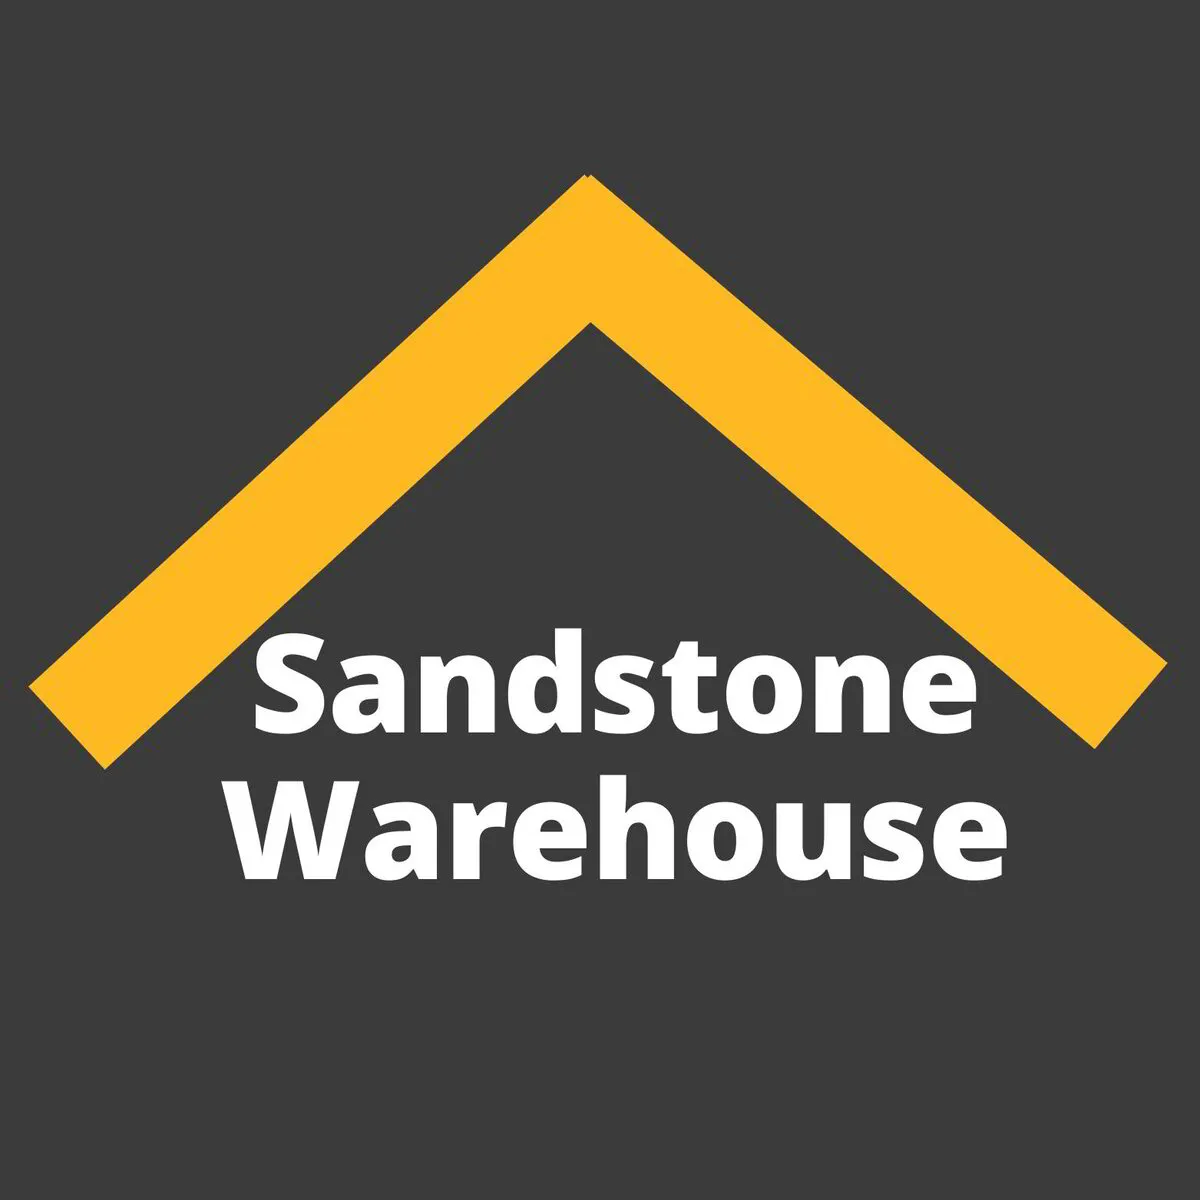 Sandstone Warehouse - Sandstone Supply And Manufacturing 